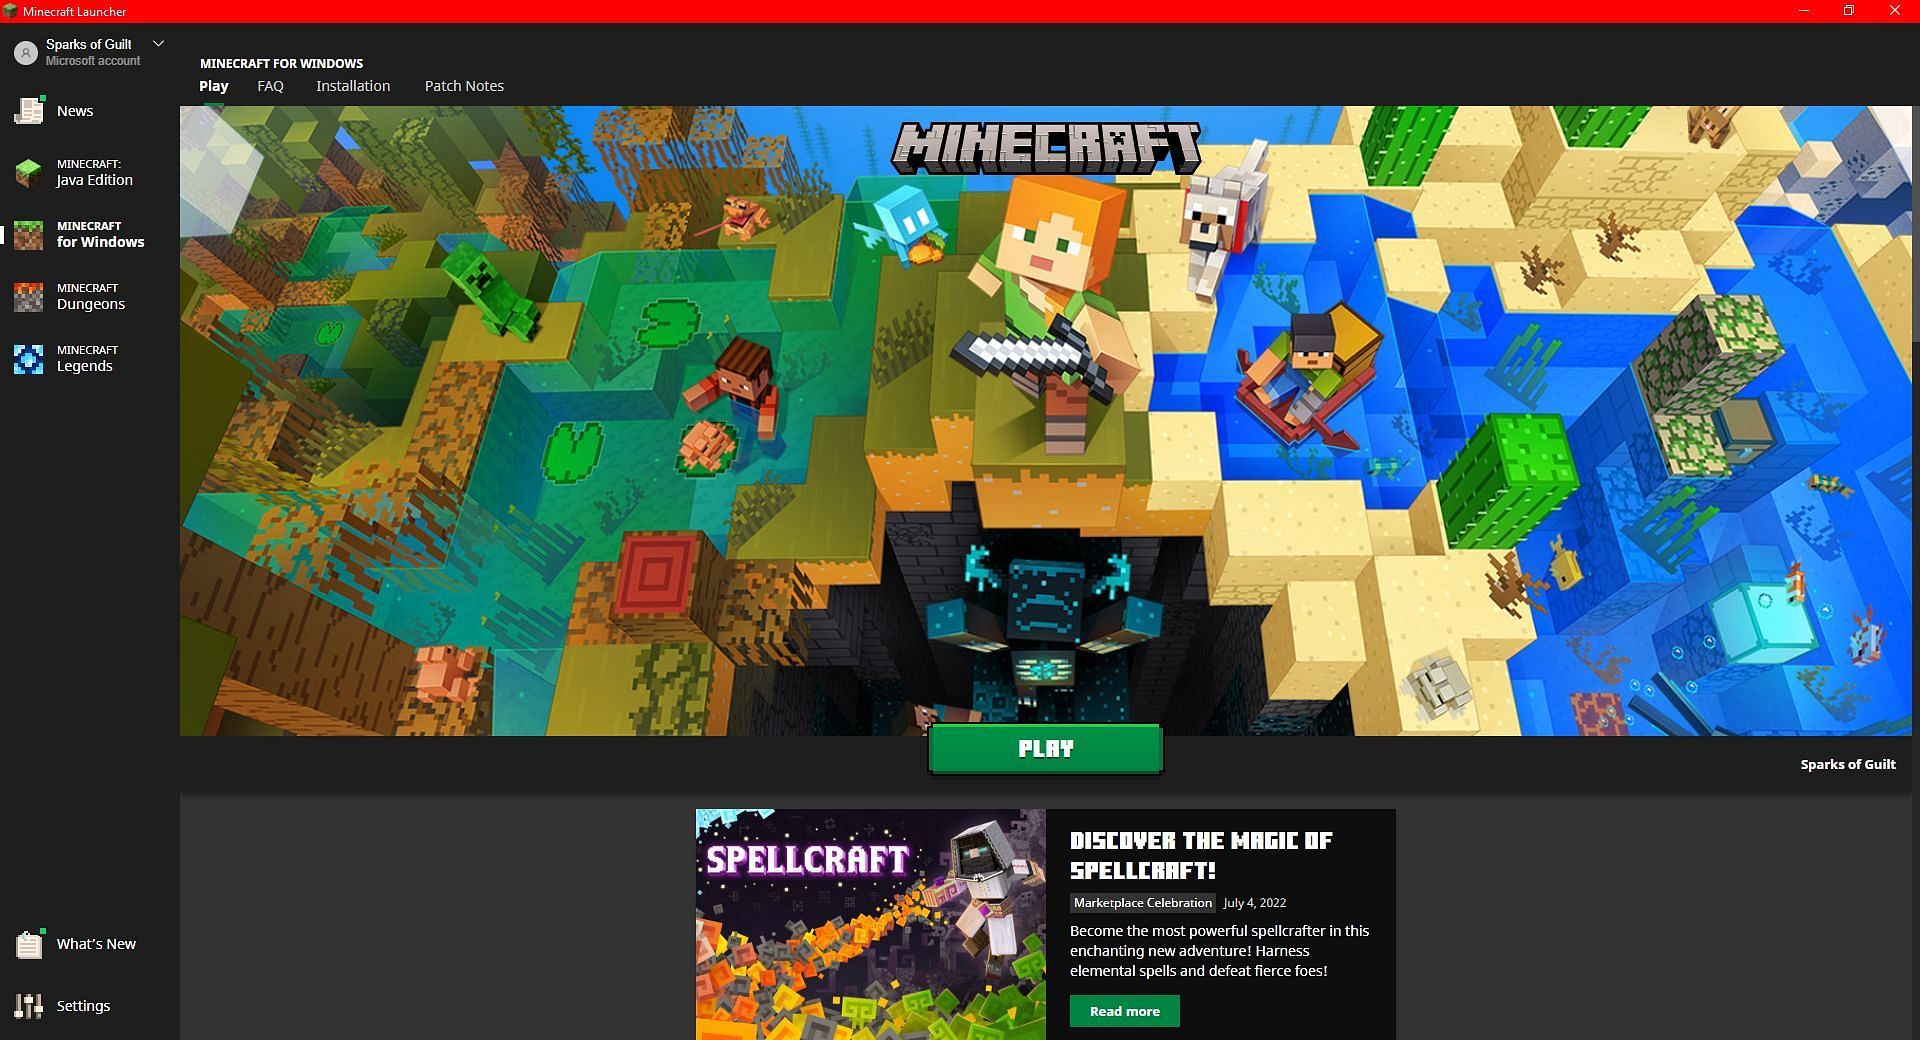 Bedrock Edition, as seen on the launcher, updated to the most recent version (Image via Mojang)